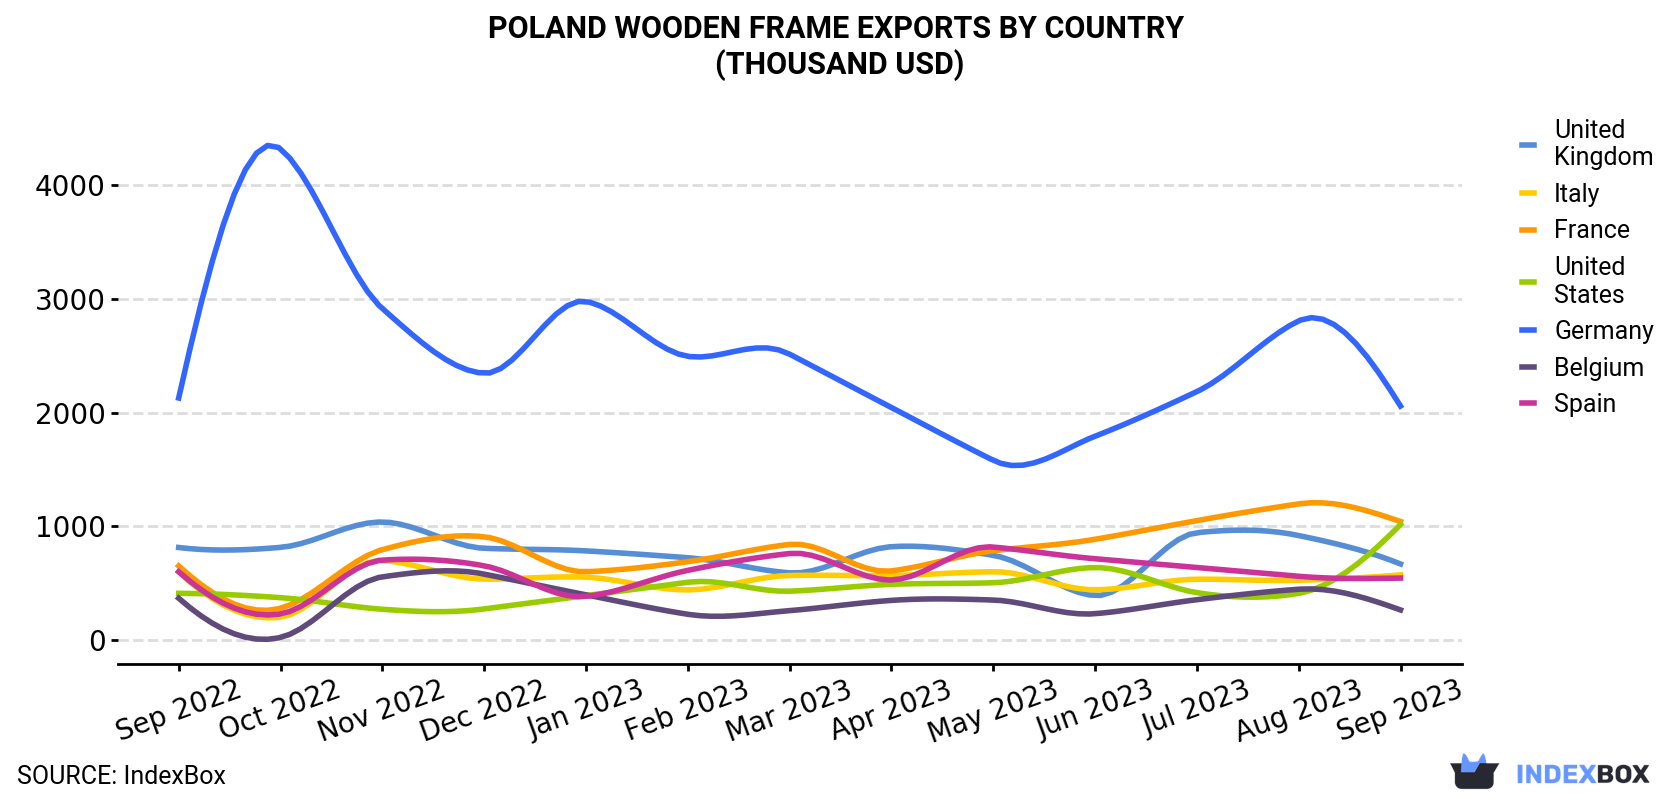 Poland Wooden Frame Exports By Country (Thousand USD)